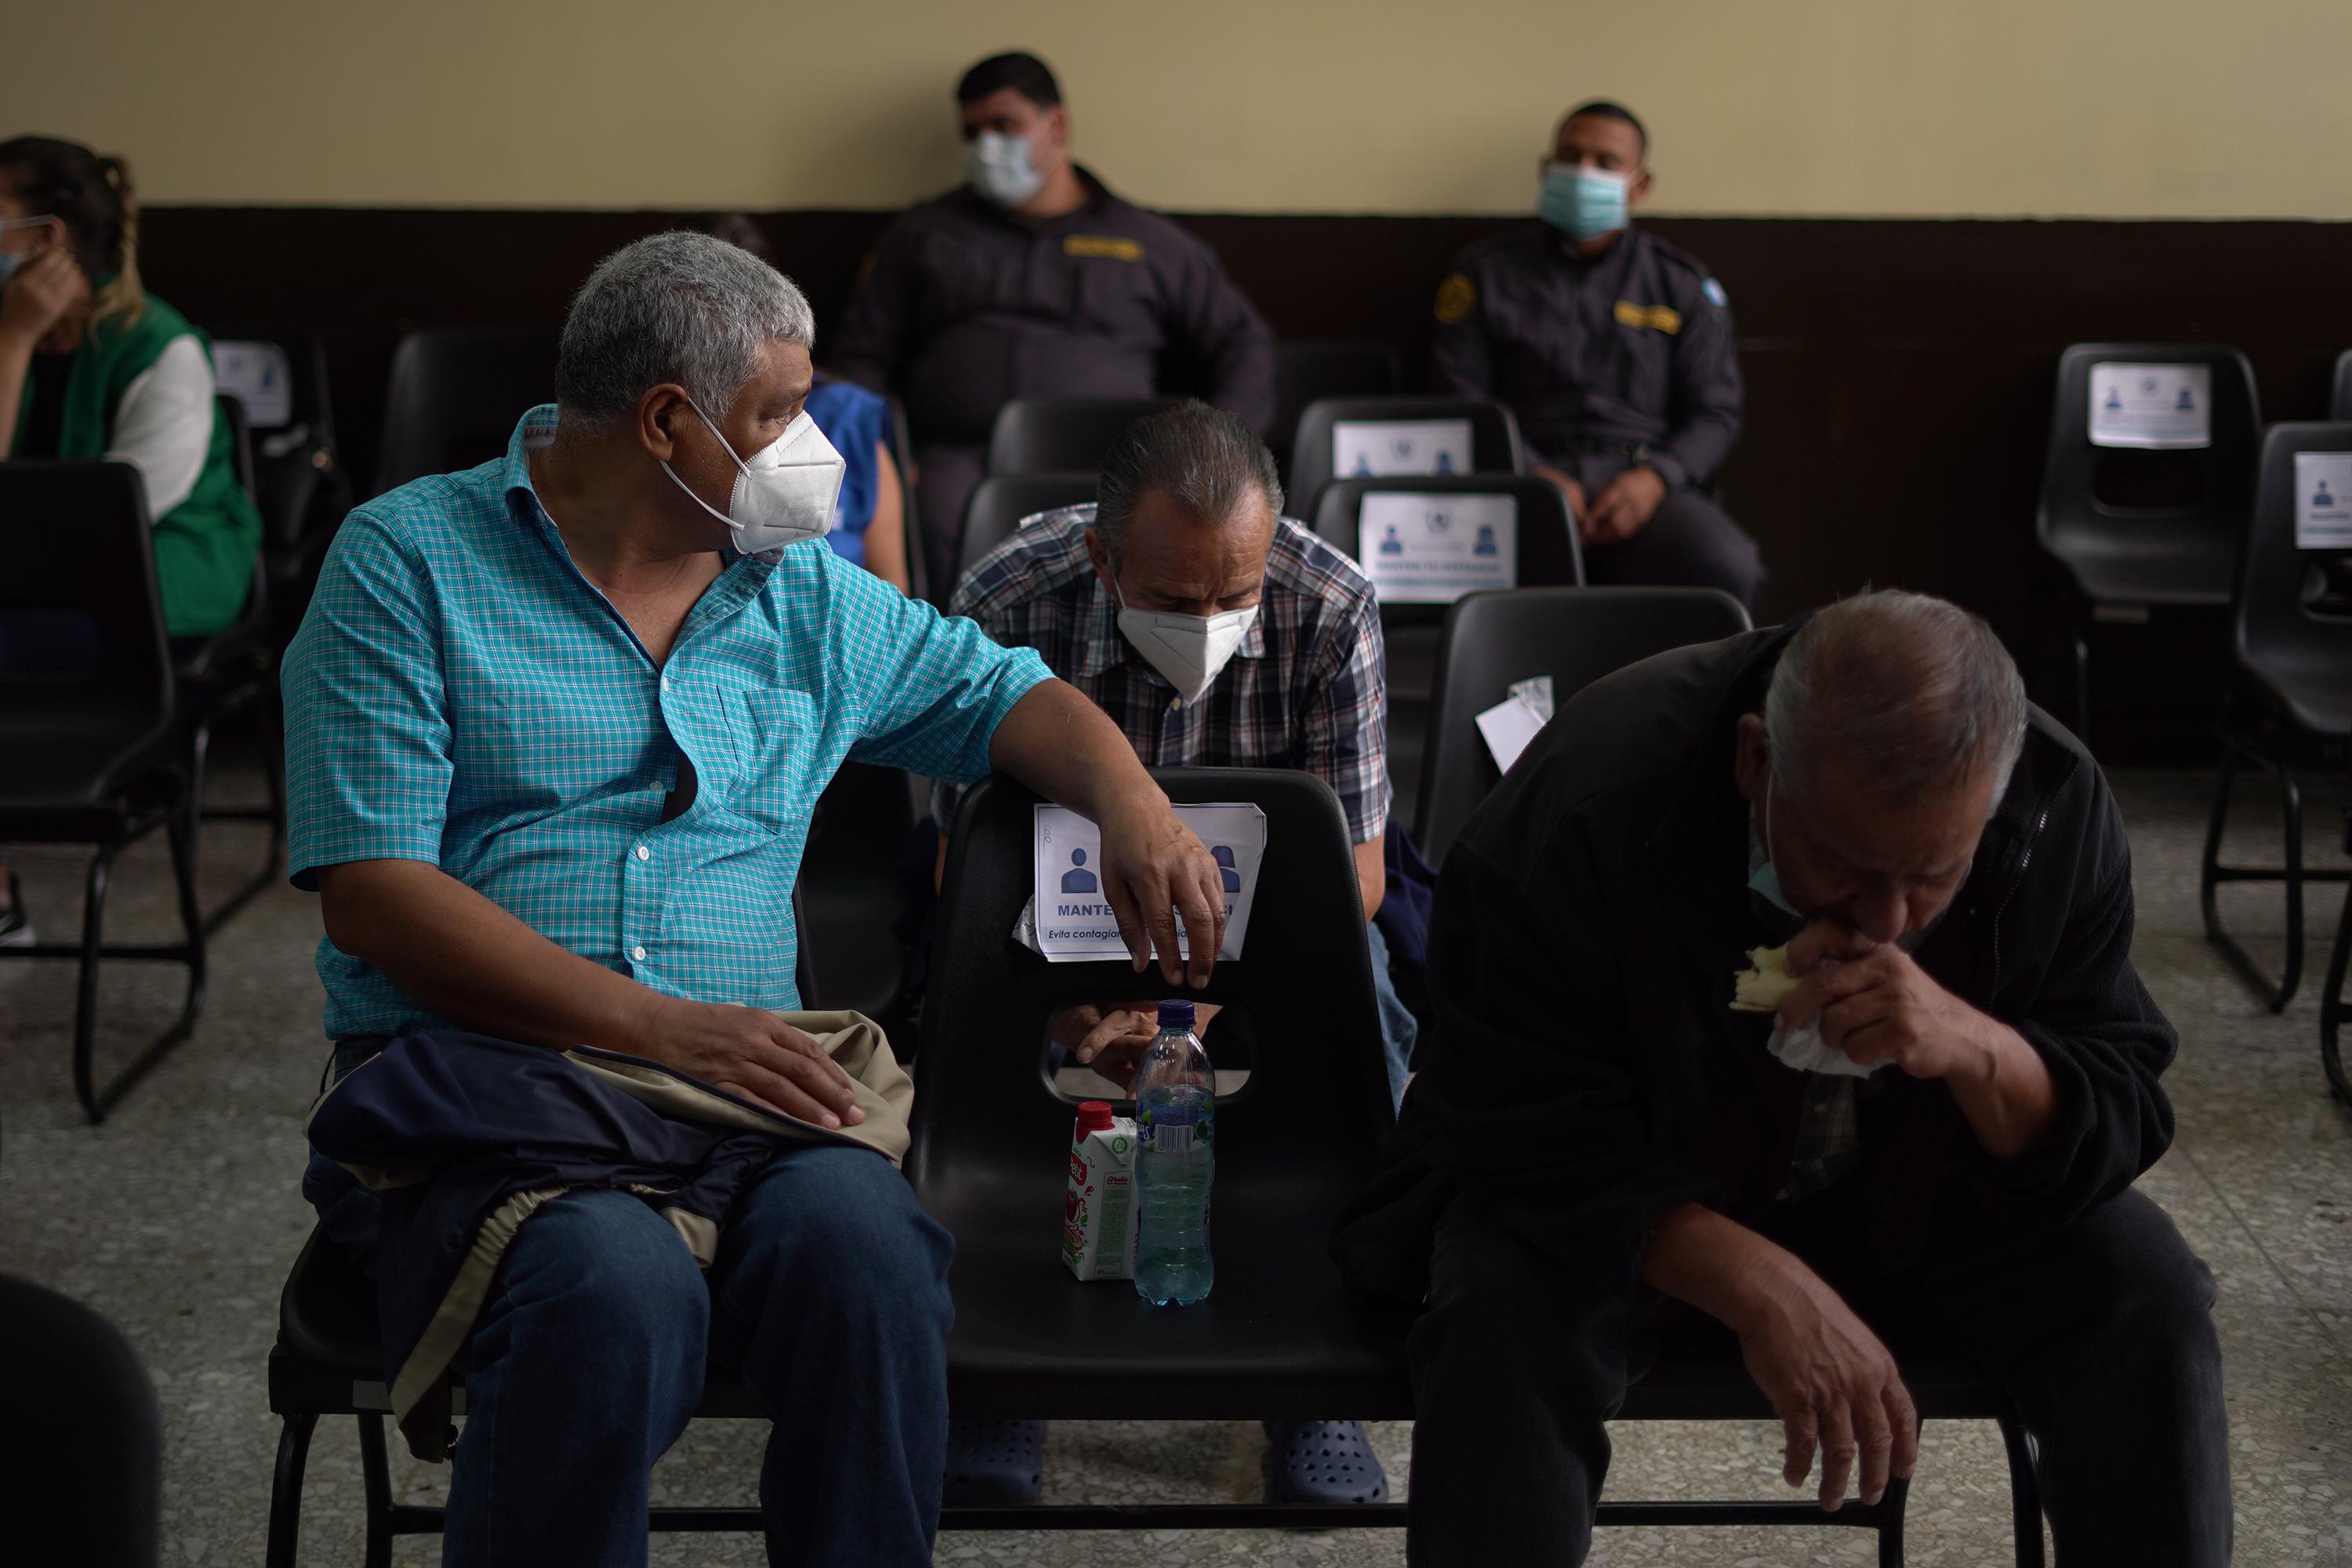 A Guatemalan High-Risk Tribunal held a pre-trial hearing on June 7, 2021 on charges against more than a dozen retired military and police officials for the alleged torture, forced disappearance, and murder of at least 195 suspected political dissidents named in a secret military hit-list between 1983 and 1985. The case is named after the Diario Militar, or 